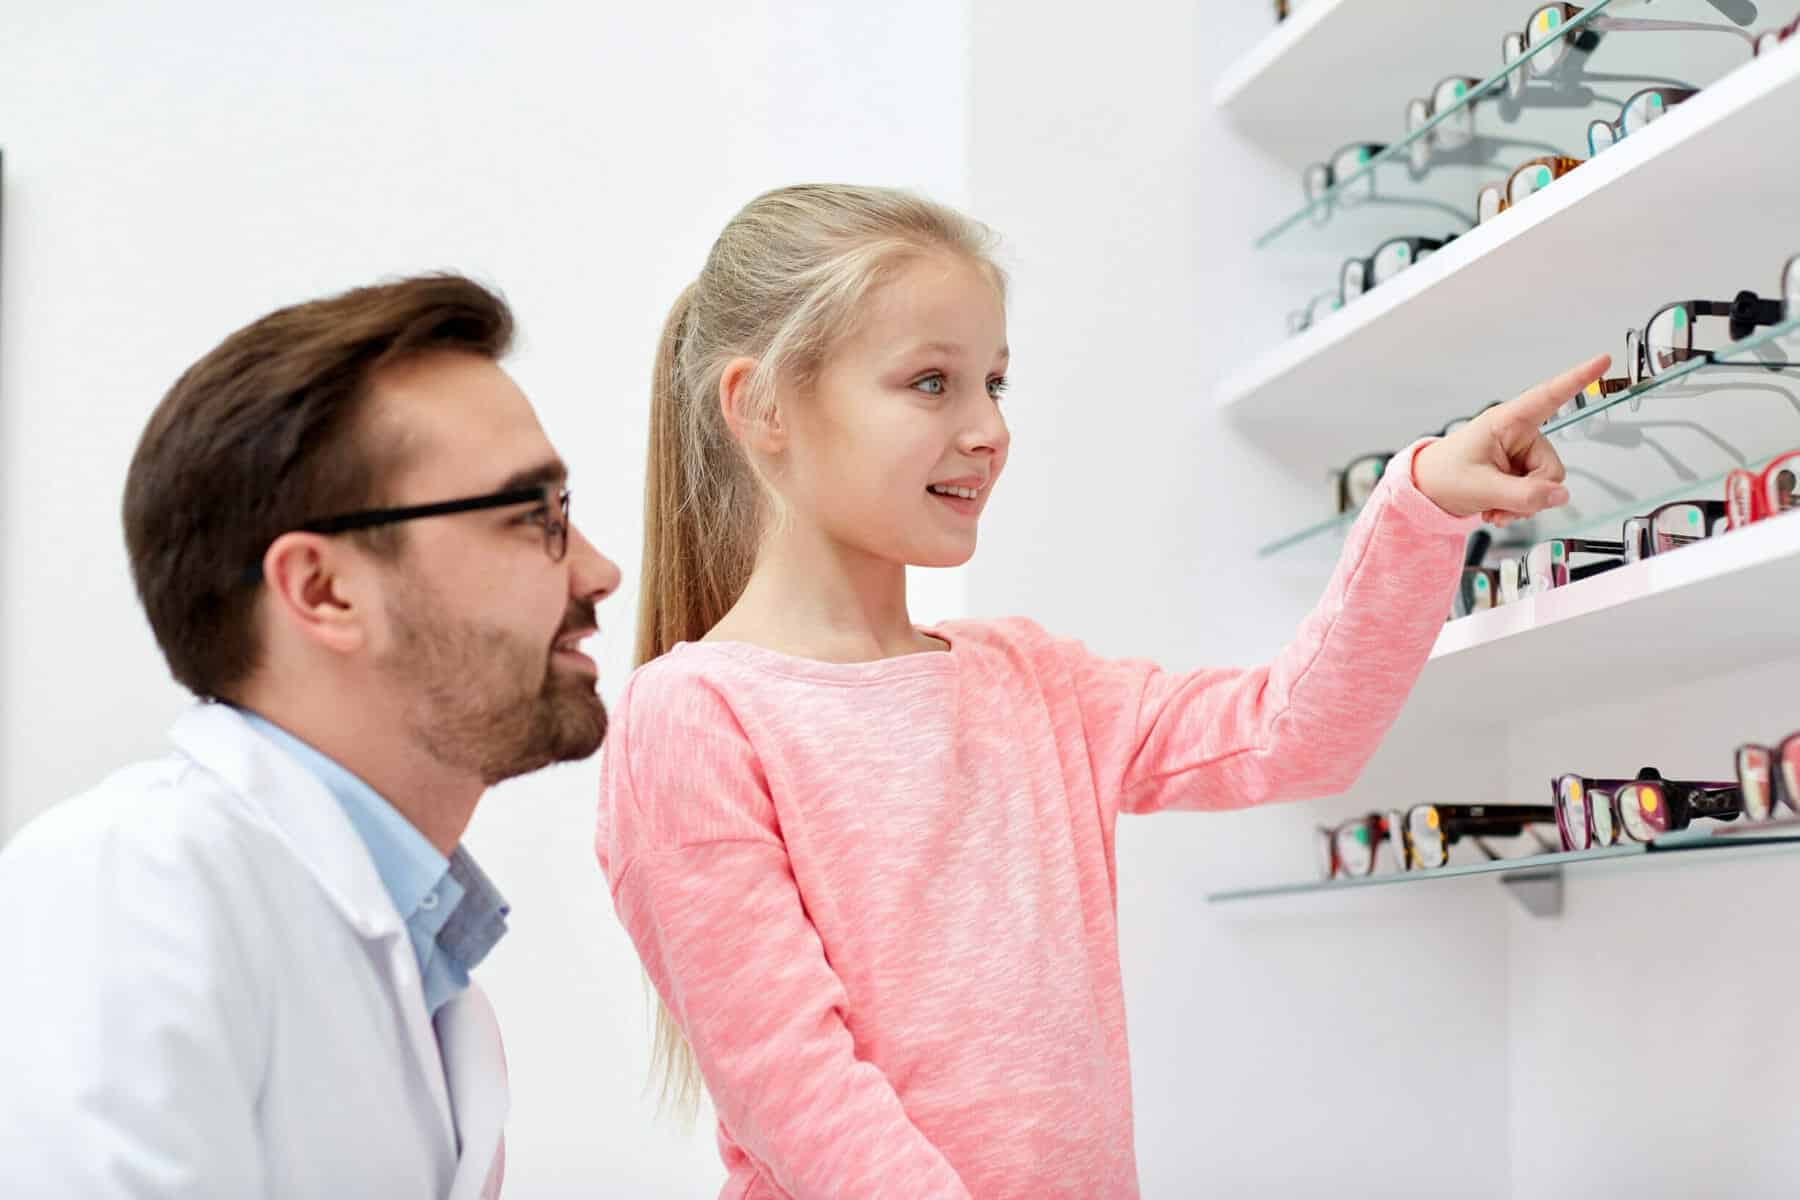 Why would a child see an ophthalmologist?